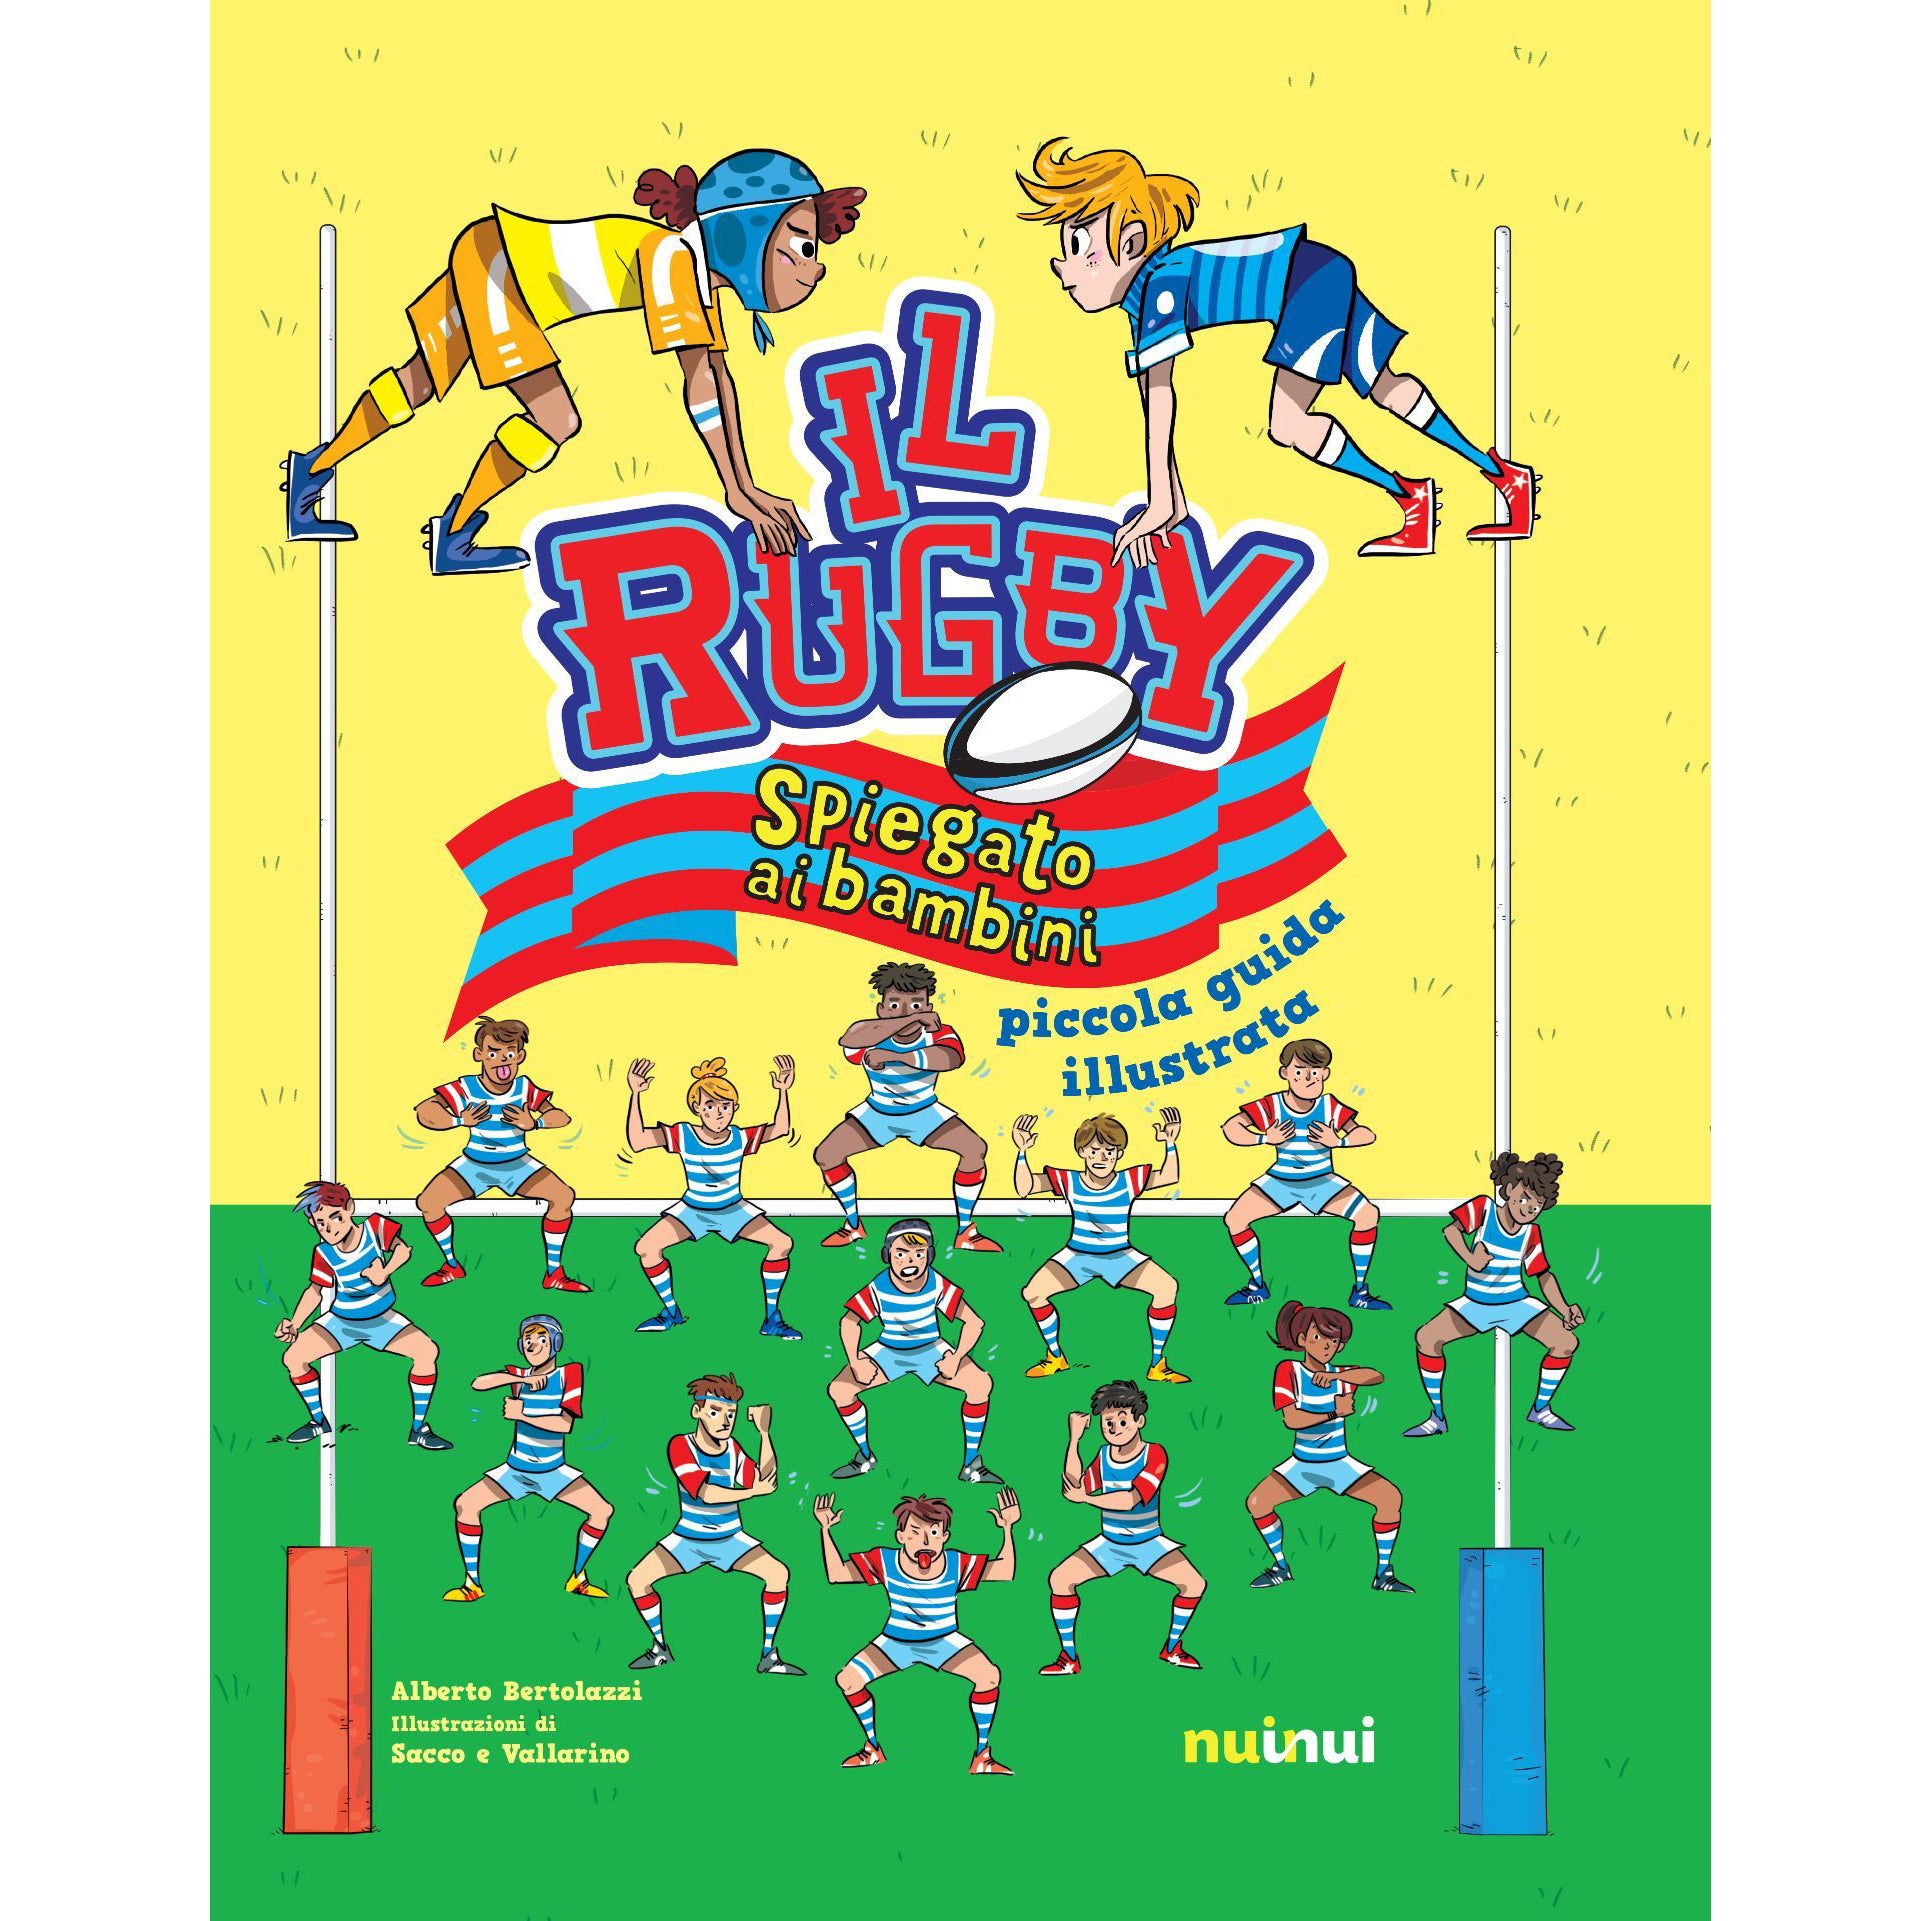 Rugby explained to children - small illustrated guide